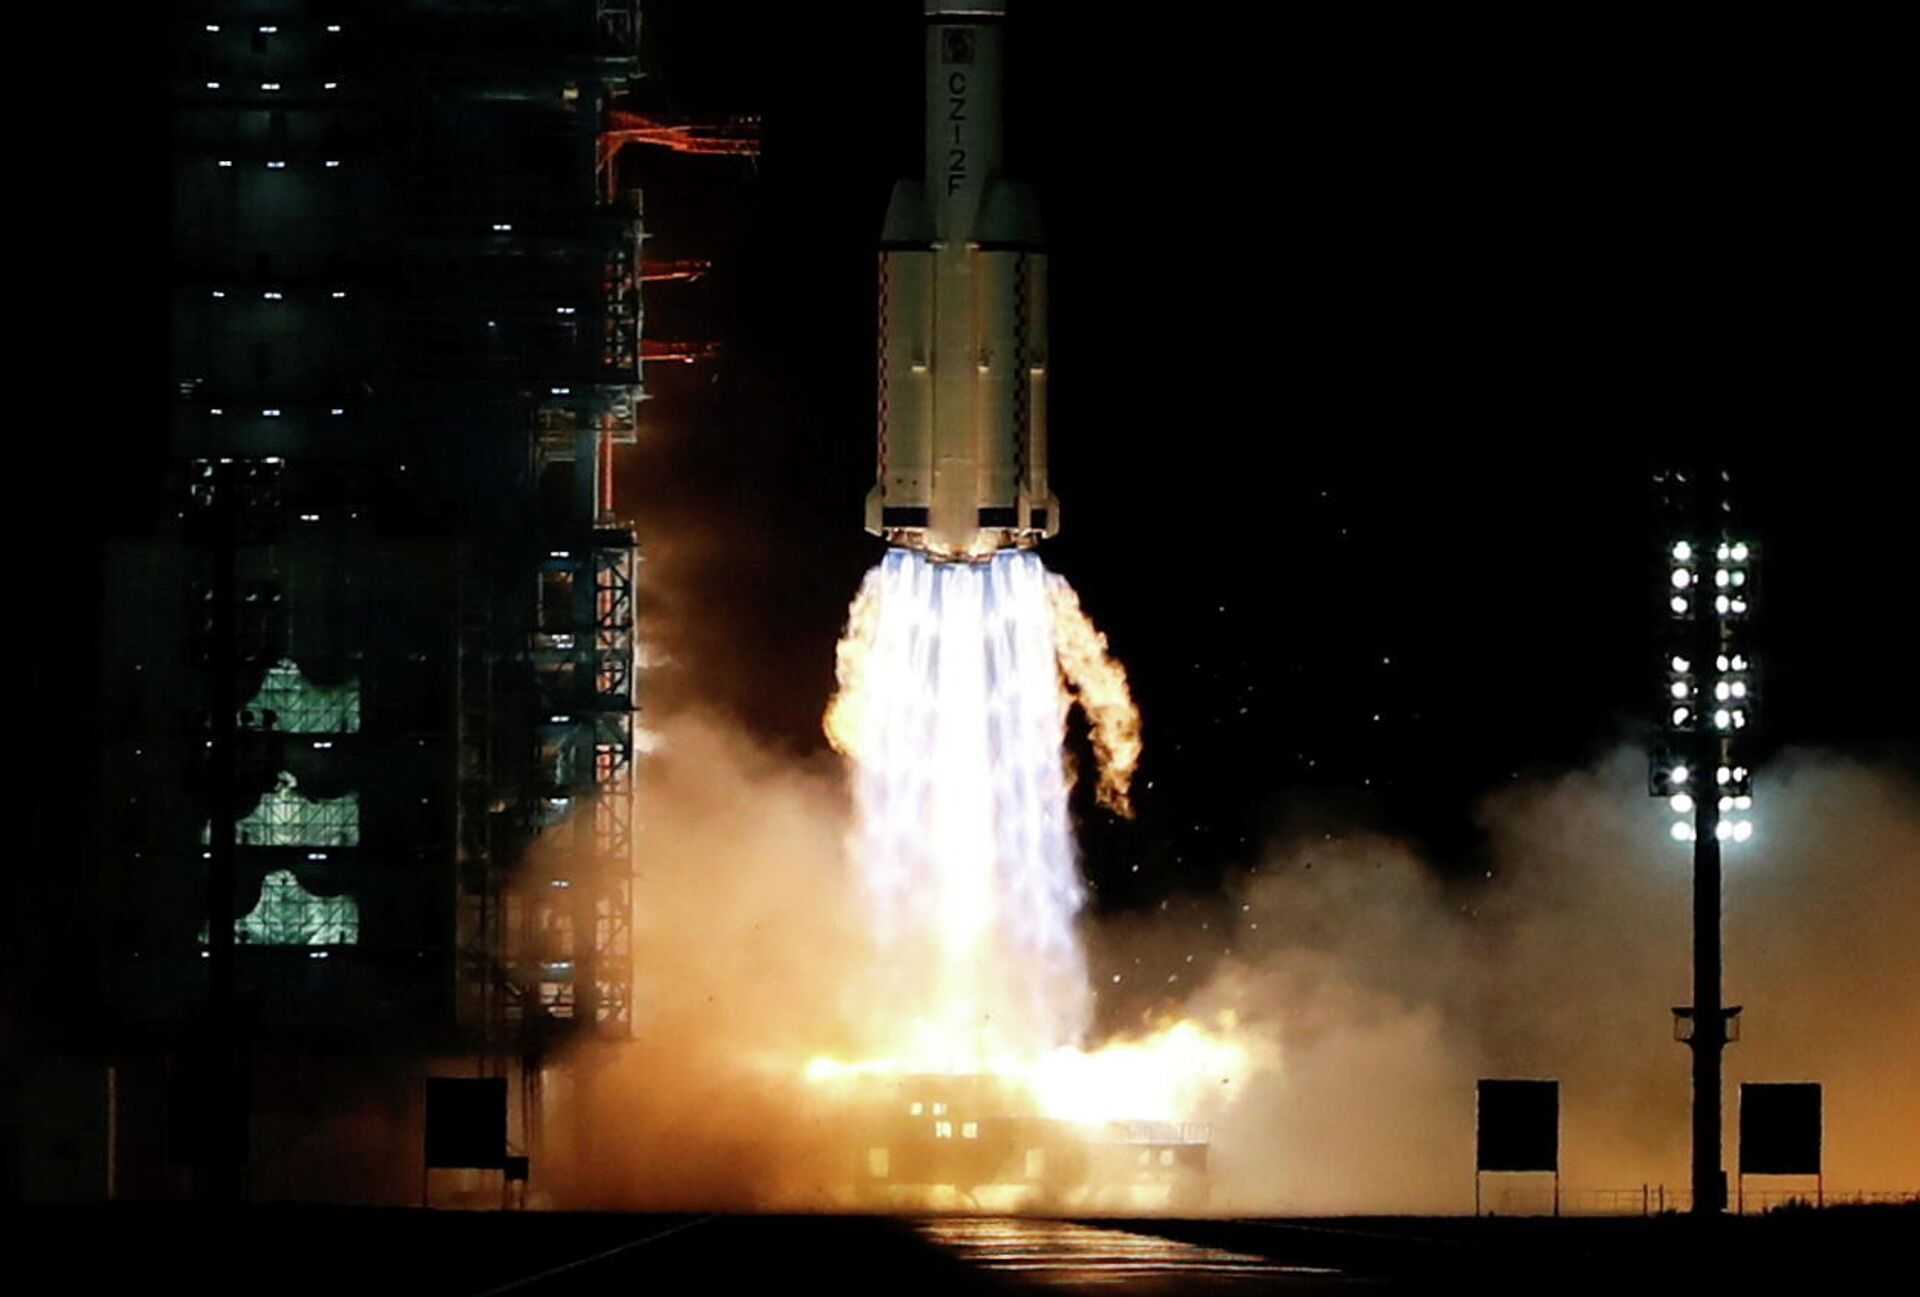 The Long March-2F Y13 rocket, carrying the Shenzhou-13 spacecraft and three astronauts in China's second crewed mission to build its own space station, launches at Jiuquan Satellite Launch Center near Jiuquan, Gansu province, China October 16, 2021. - Sputnik International, 1920, 08.11.2021